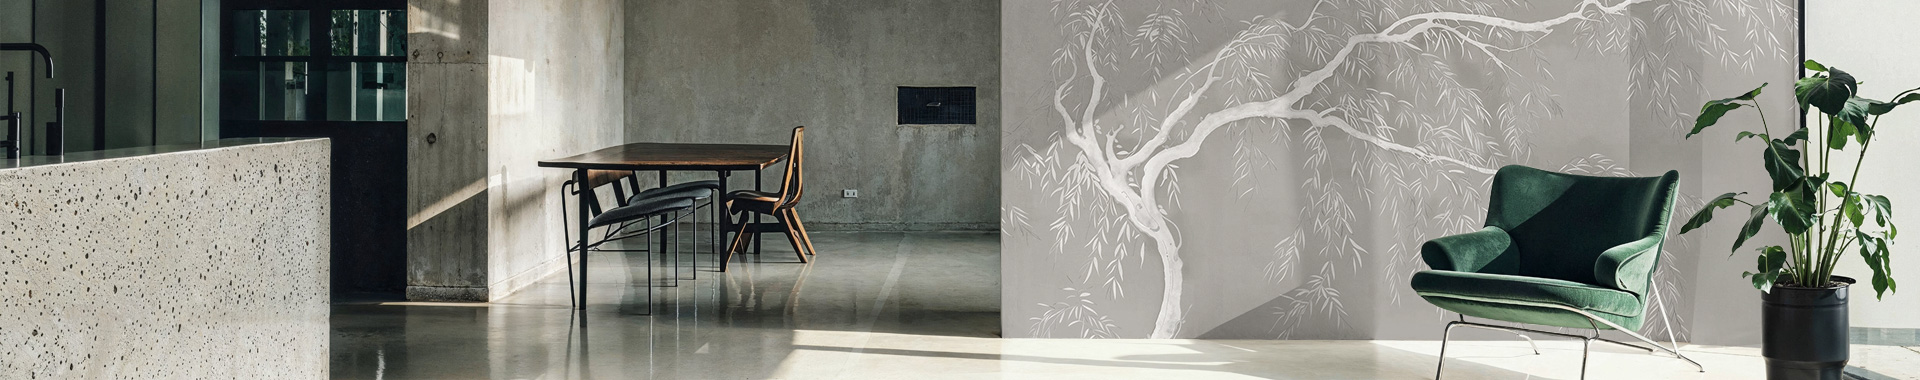 japanese willow tree wallpaper with a green chair in a minimalist modern concrete interior design setting